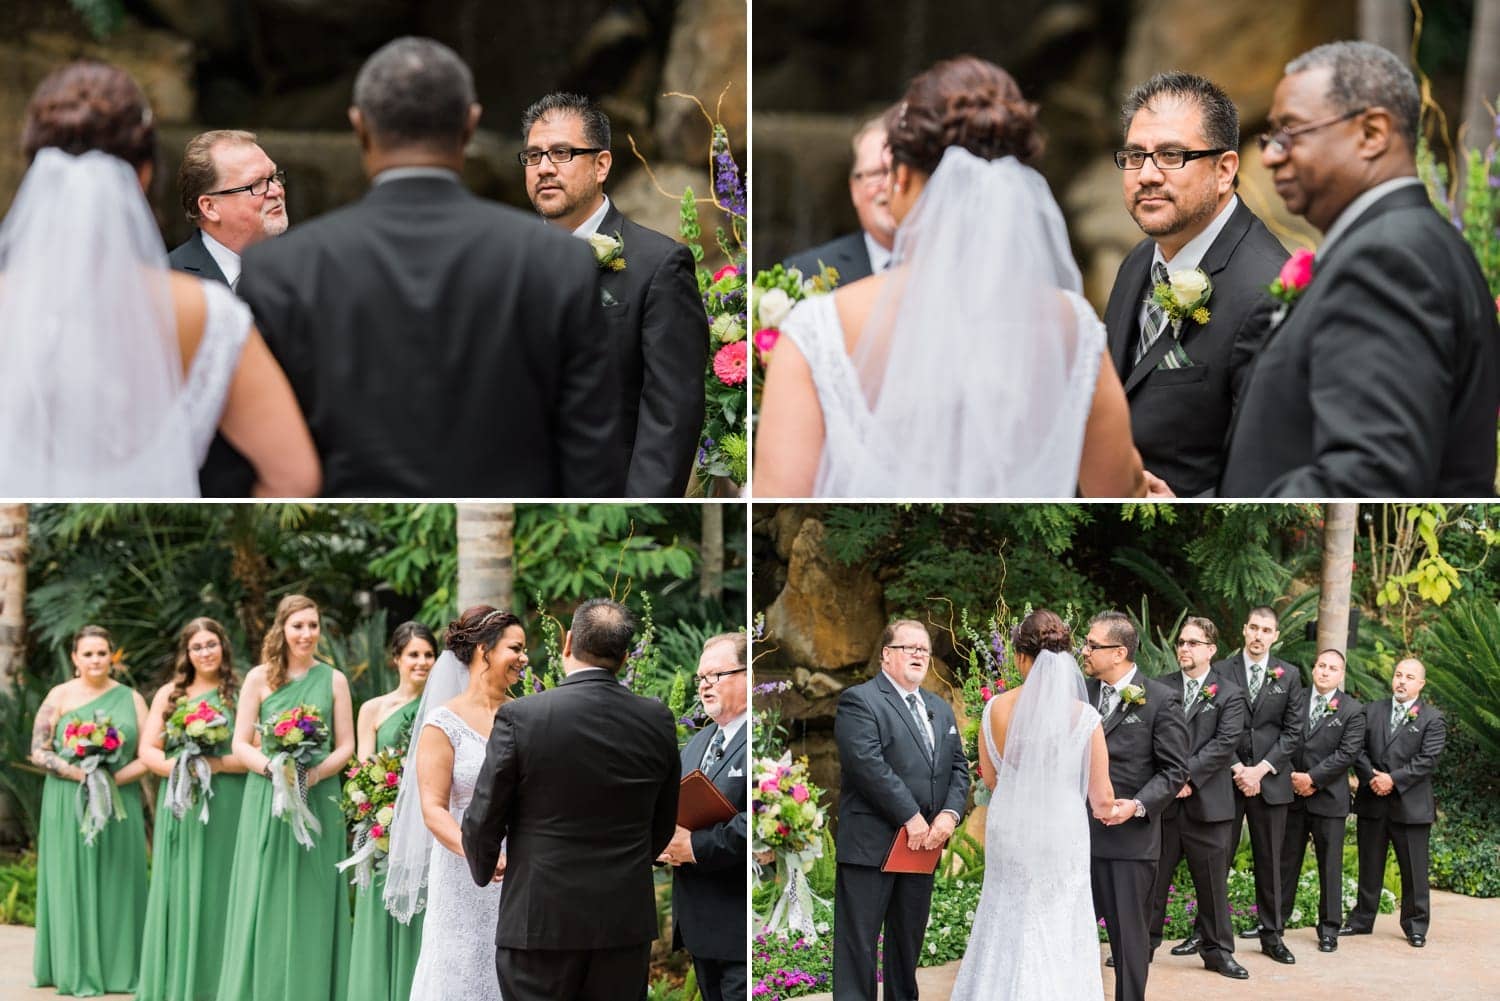 Ceremony photography at Grand Tradition Arbor Terrace